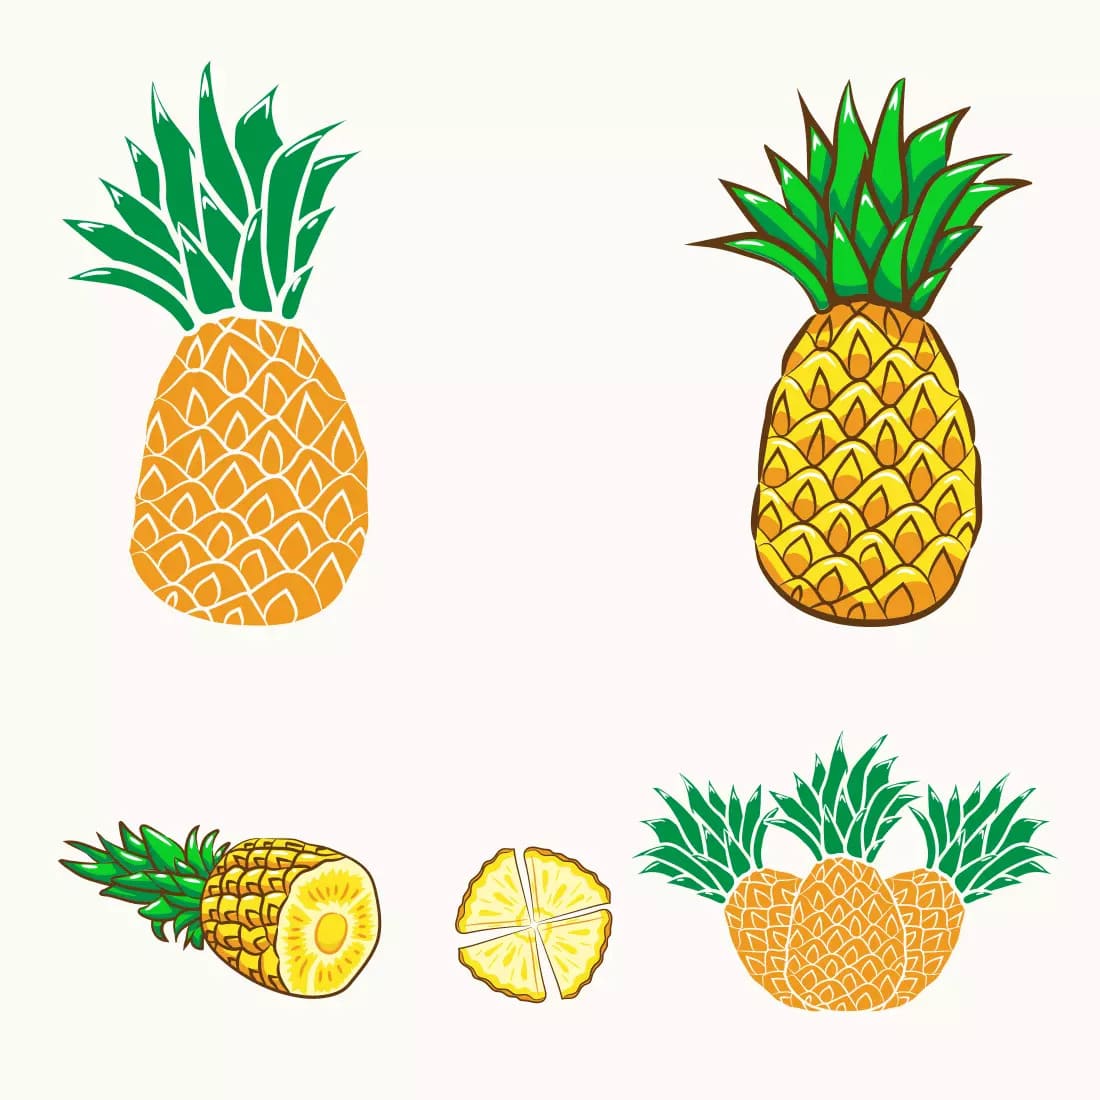 Pineapple SVG Bundle Preview 2.